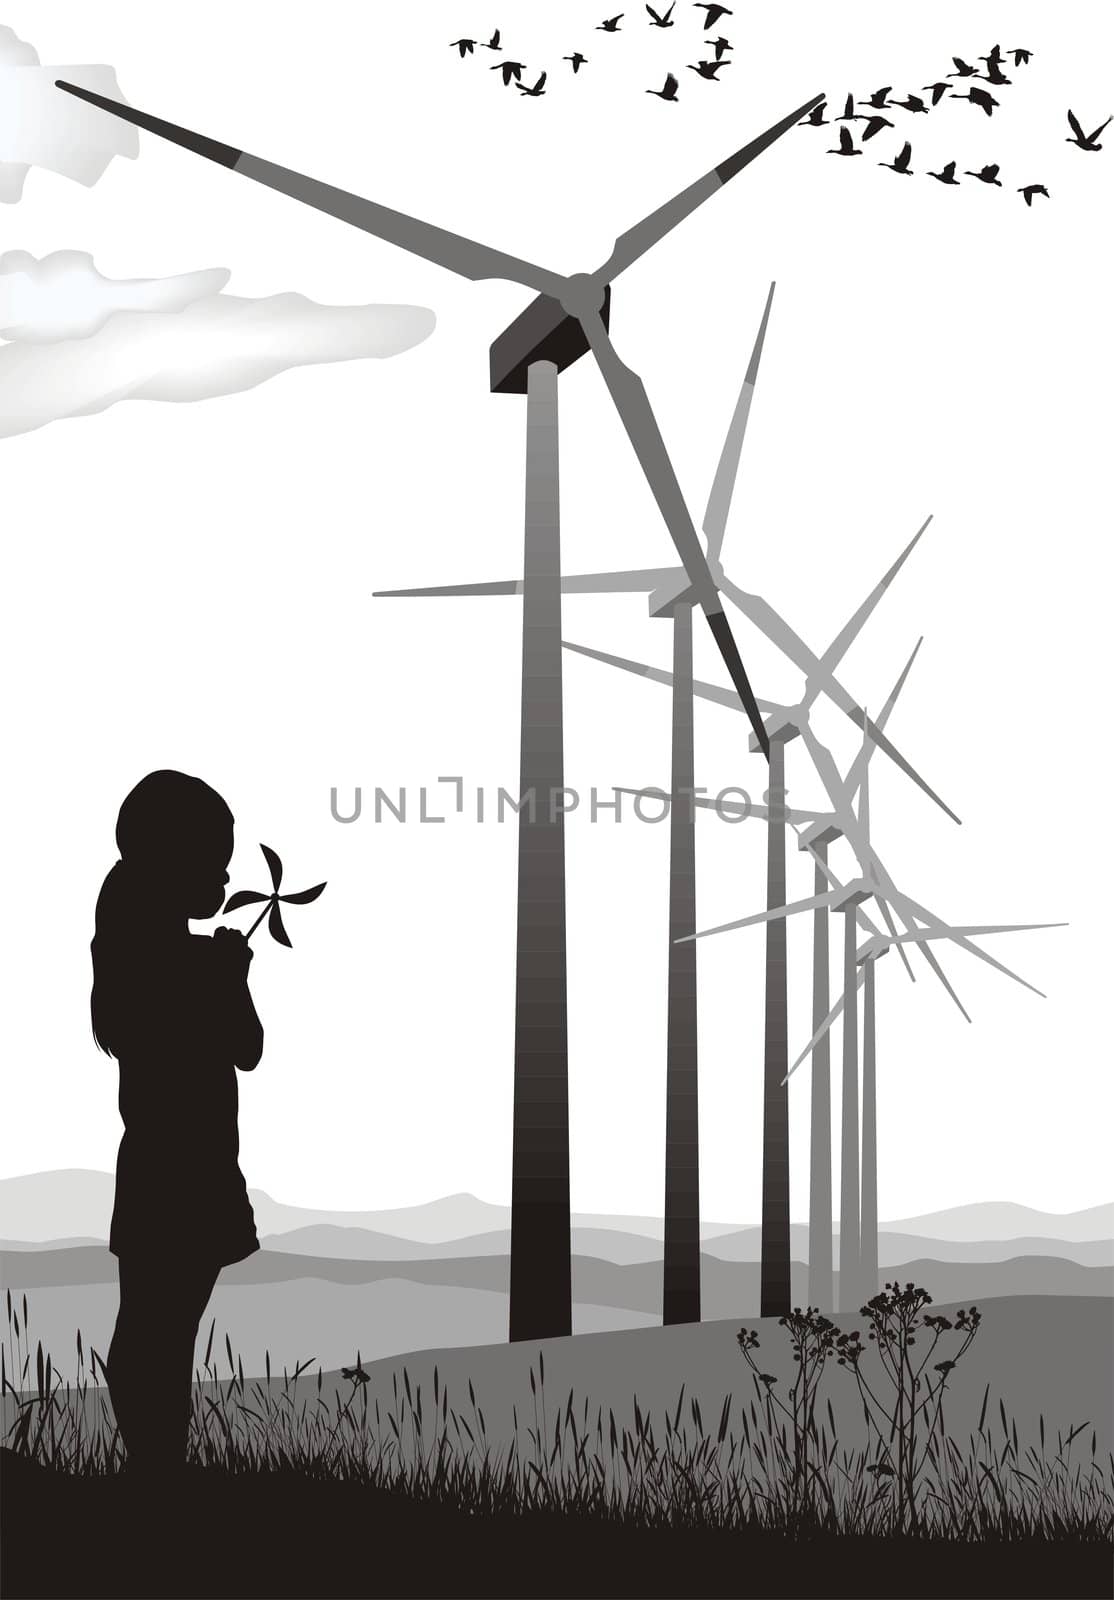 A small propeller and large wind farms, vector illustration